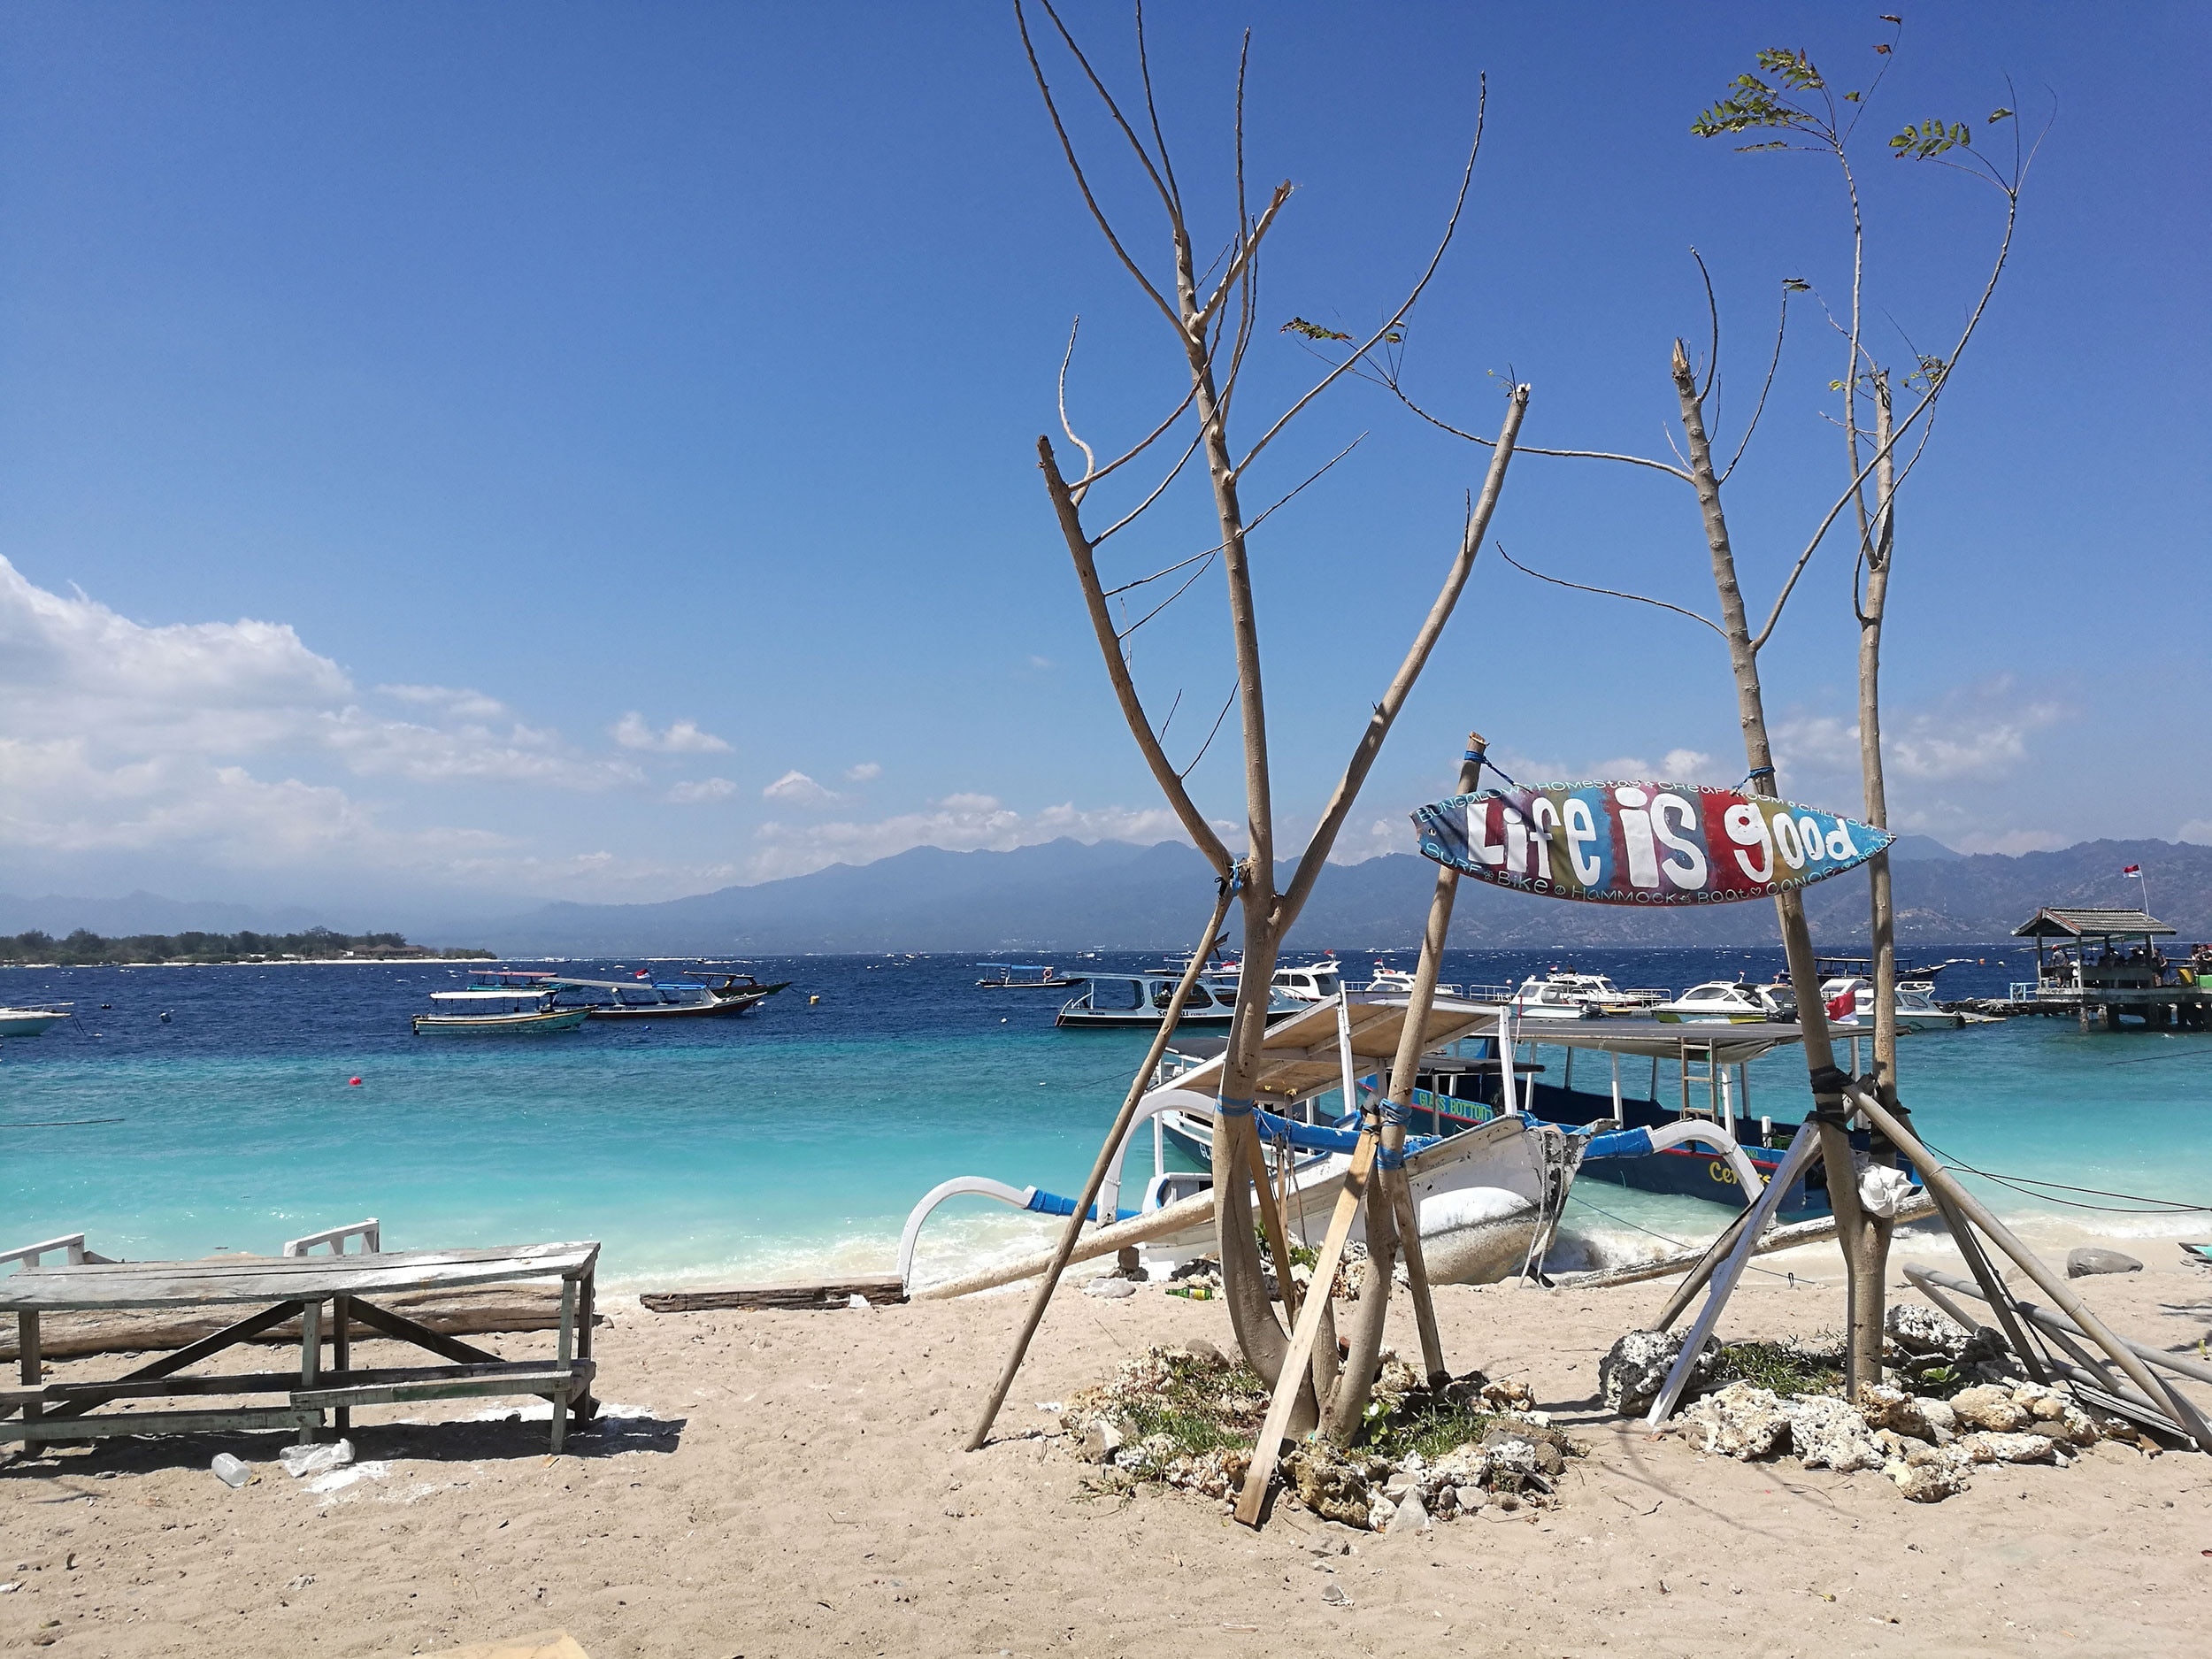 Life is Good! Enjoy the moment when you having a clear water beach. Miss the holiday in Gili Trawangan!
#lifeatexpedia